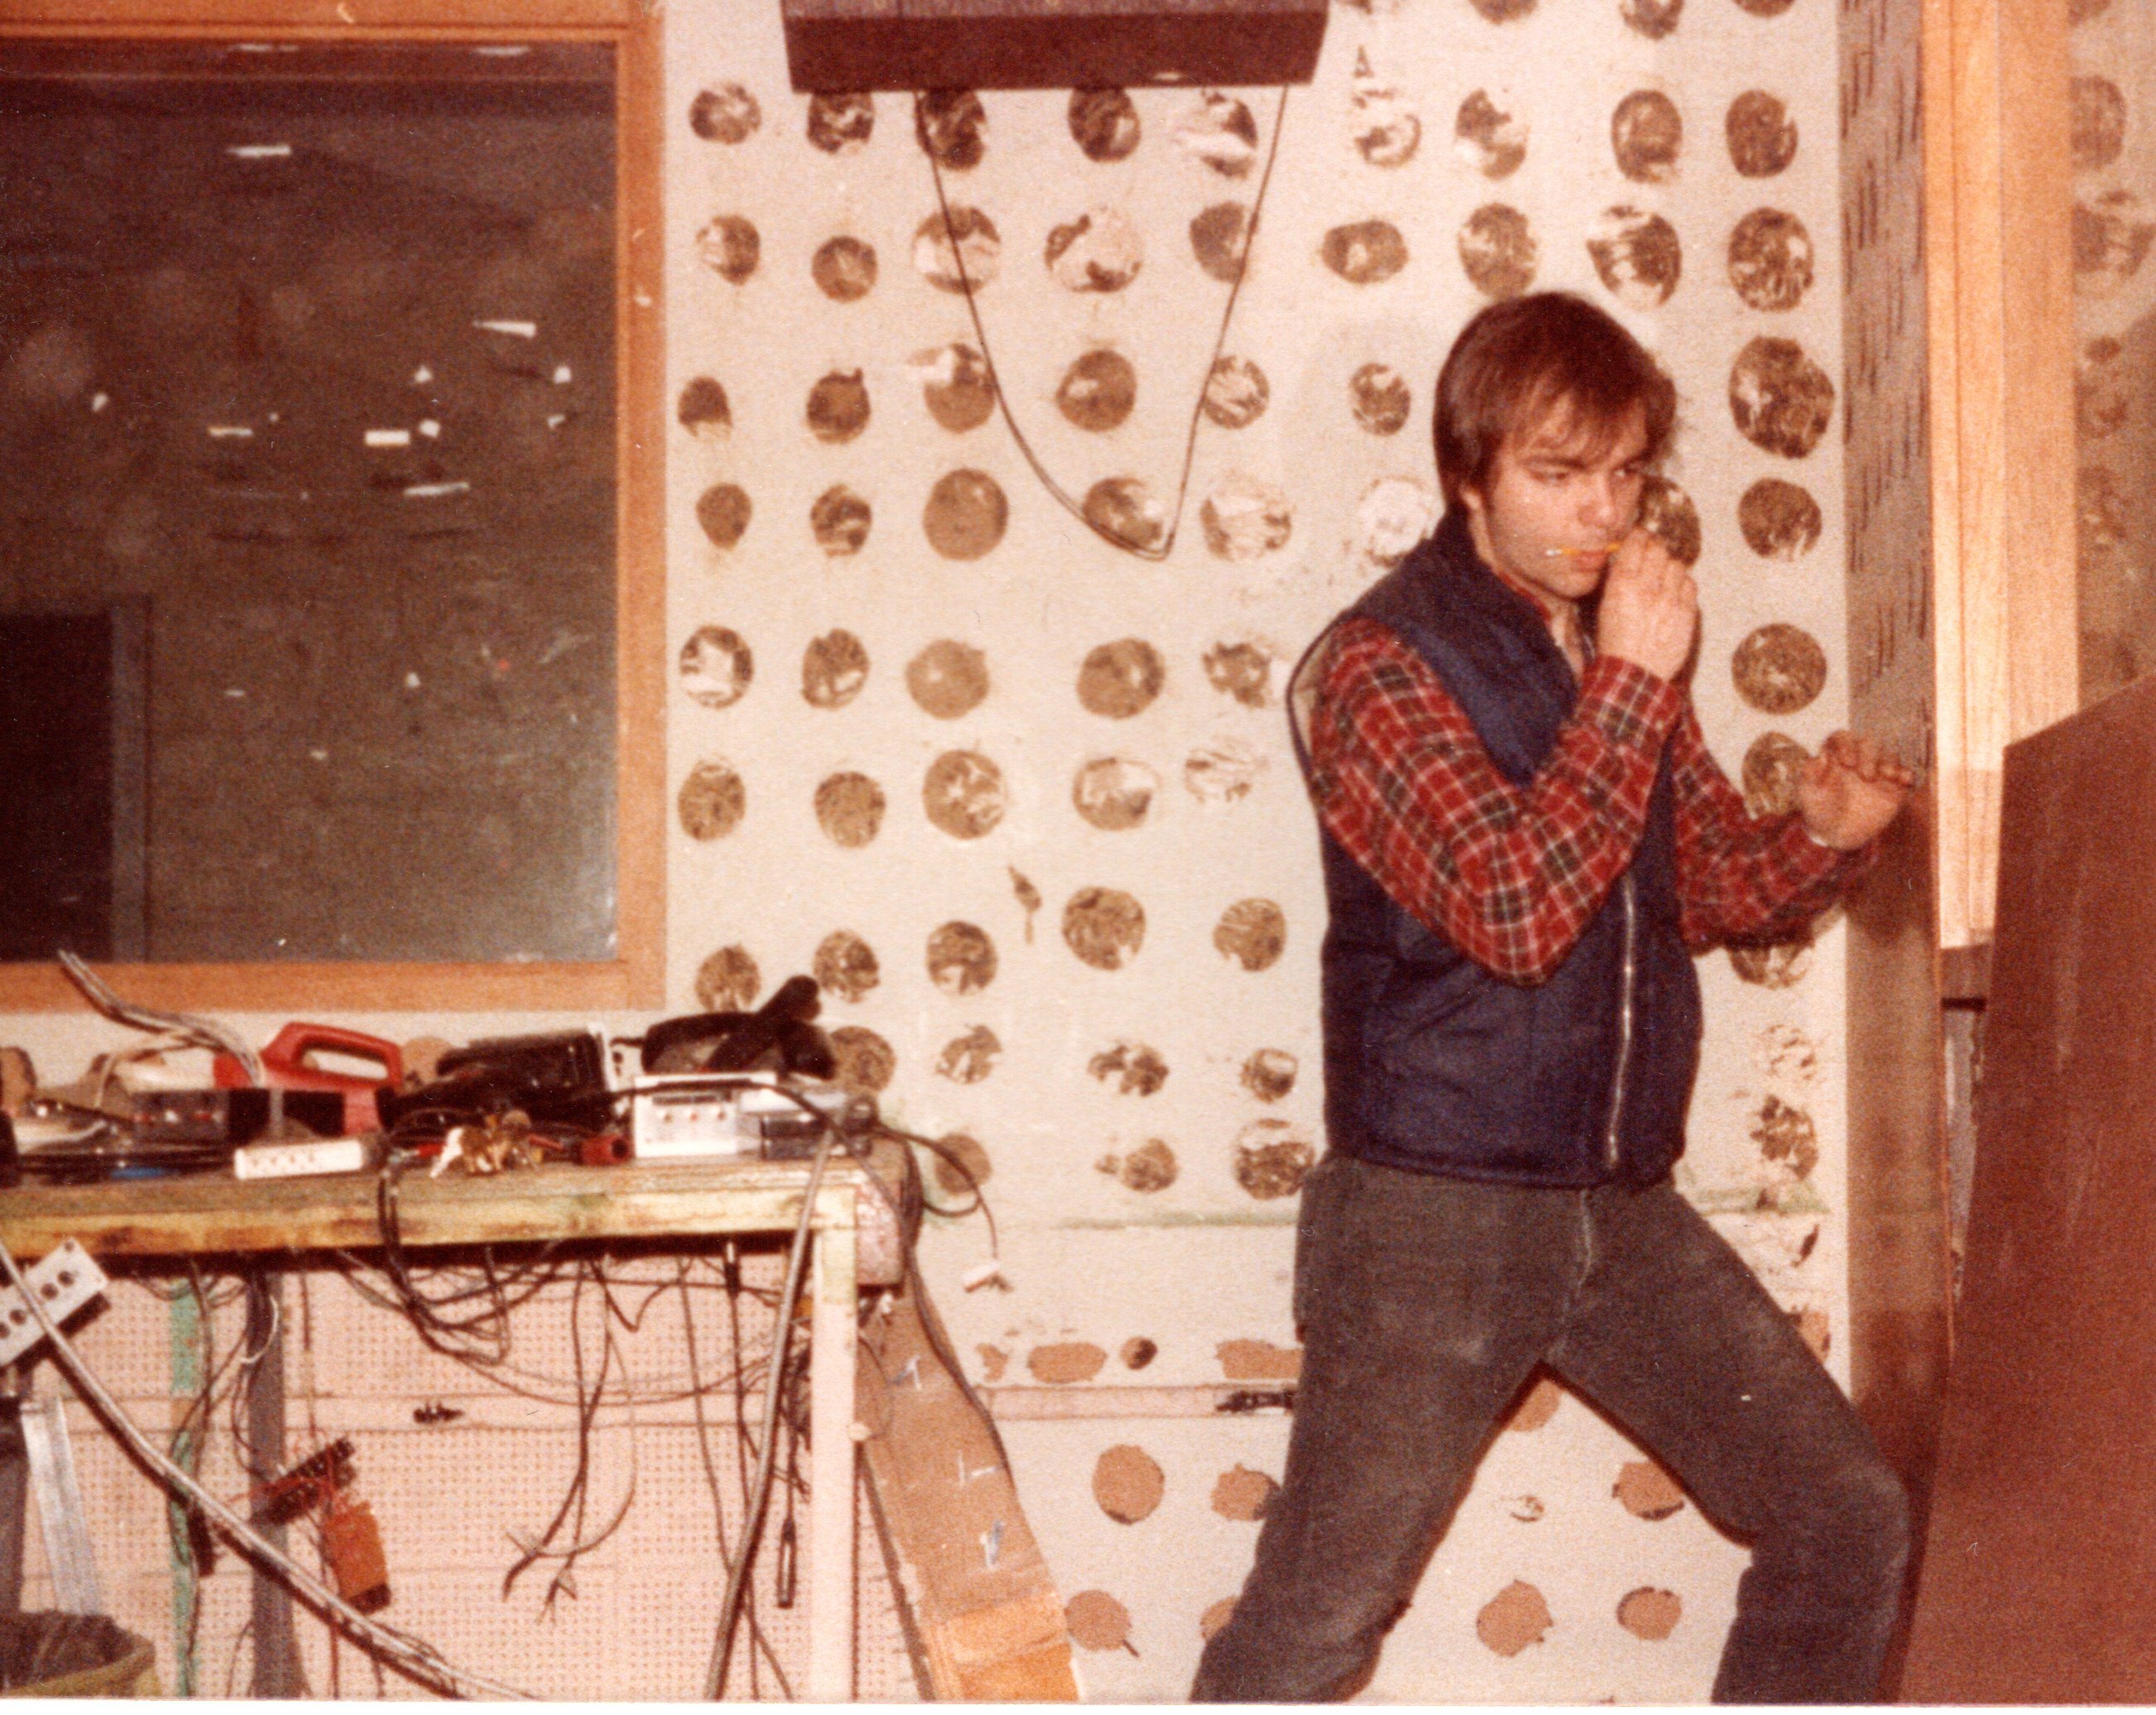 1983 - The rebuild of FM - This was the first time WRSU abandoned the Acoustical Tile